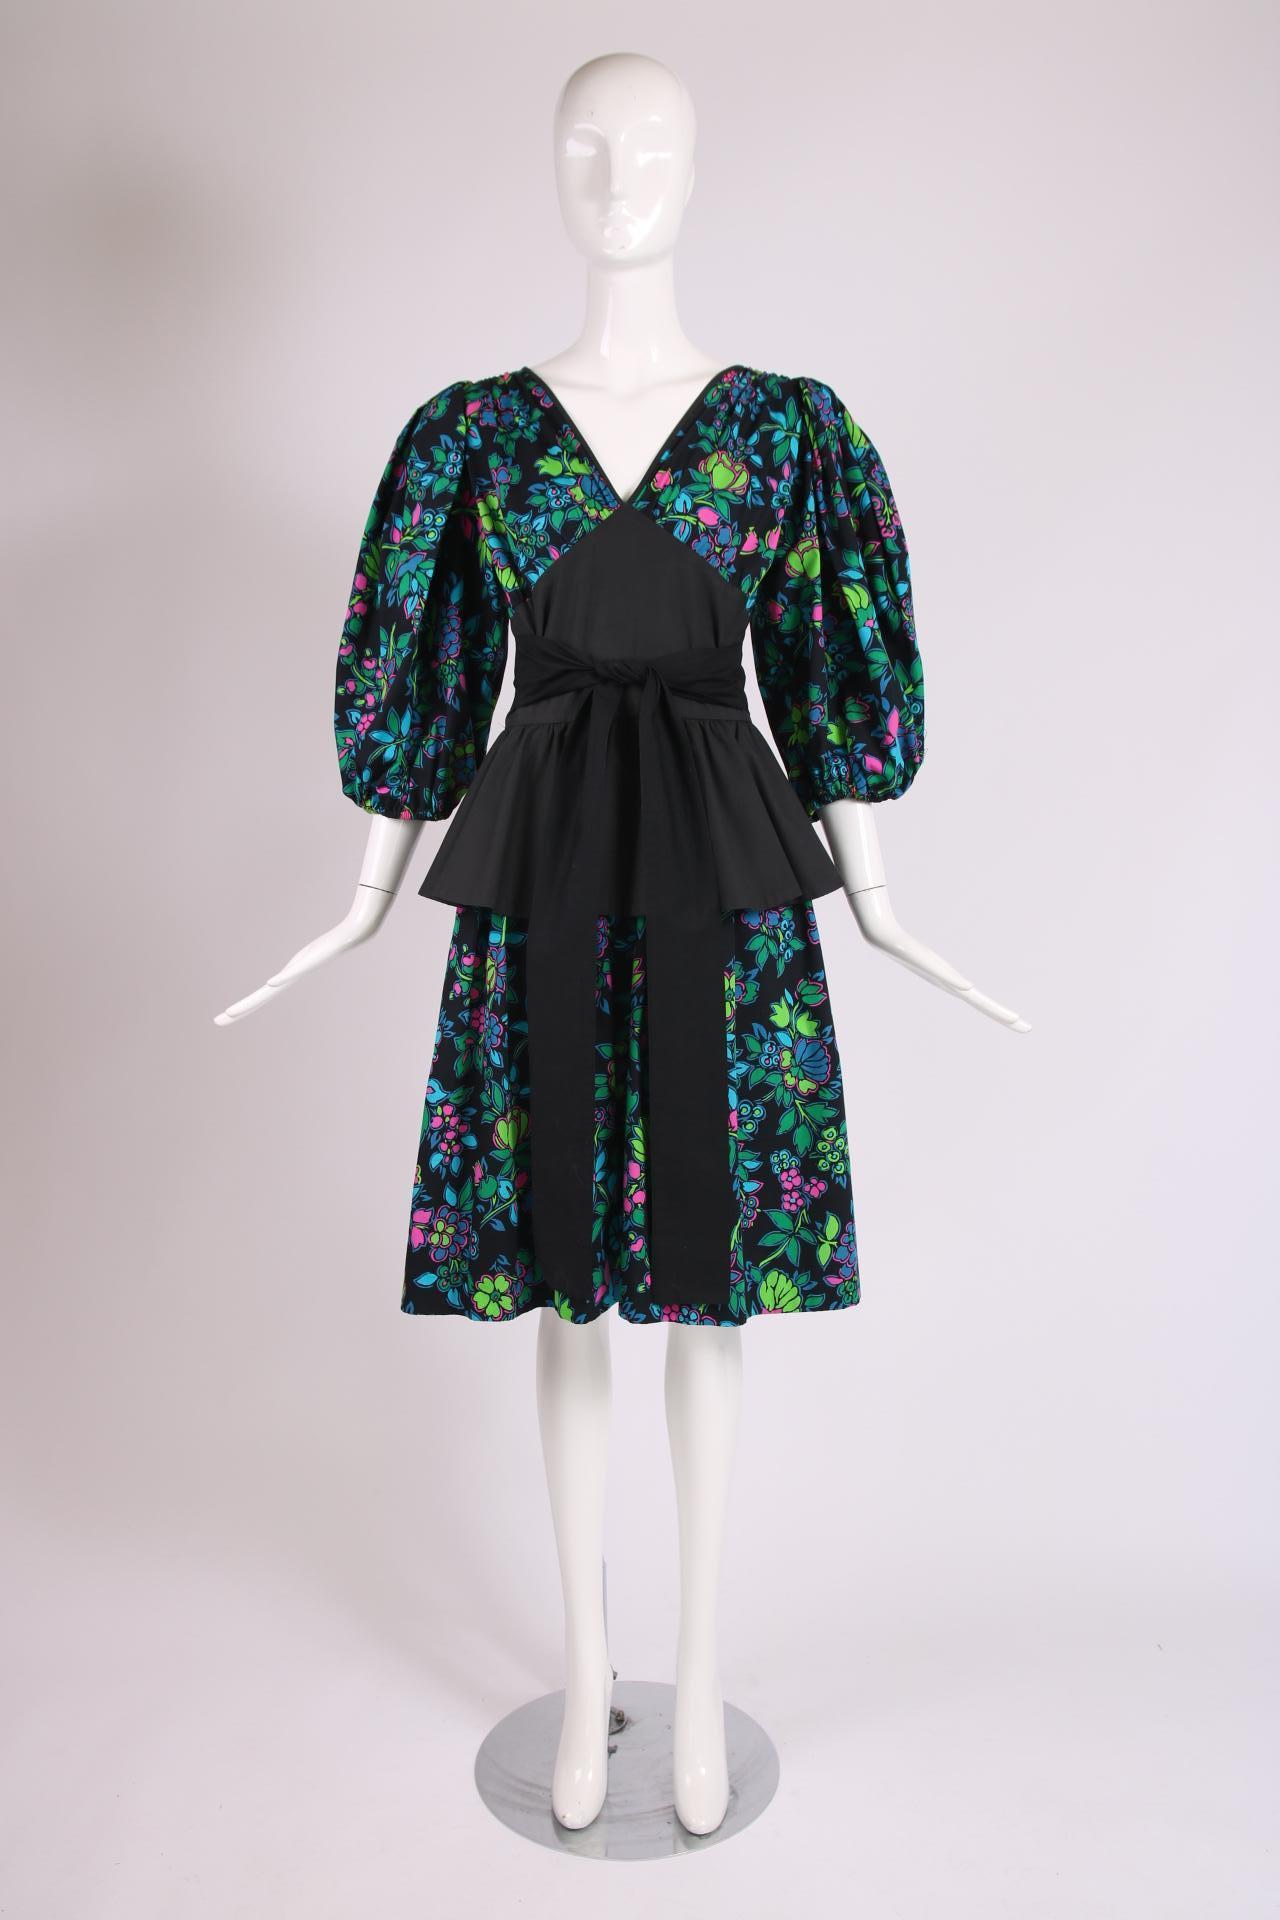 Yves Saint Laurent floral print cotton dress with black yoke at bodice, black peplum, balloon sleeves and black self belt. No size tag - please consult measurements.

Bust - 36